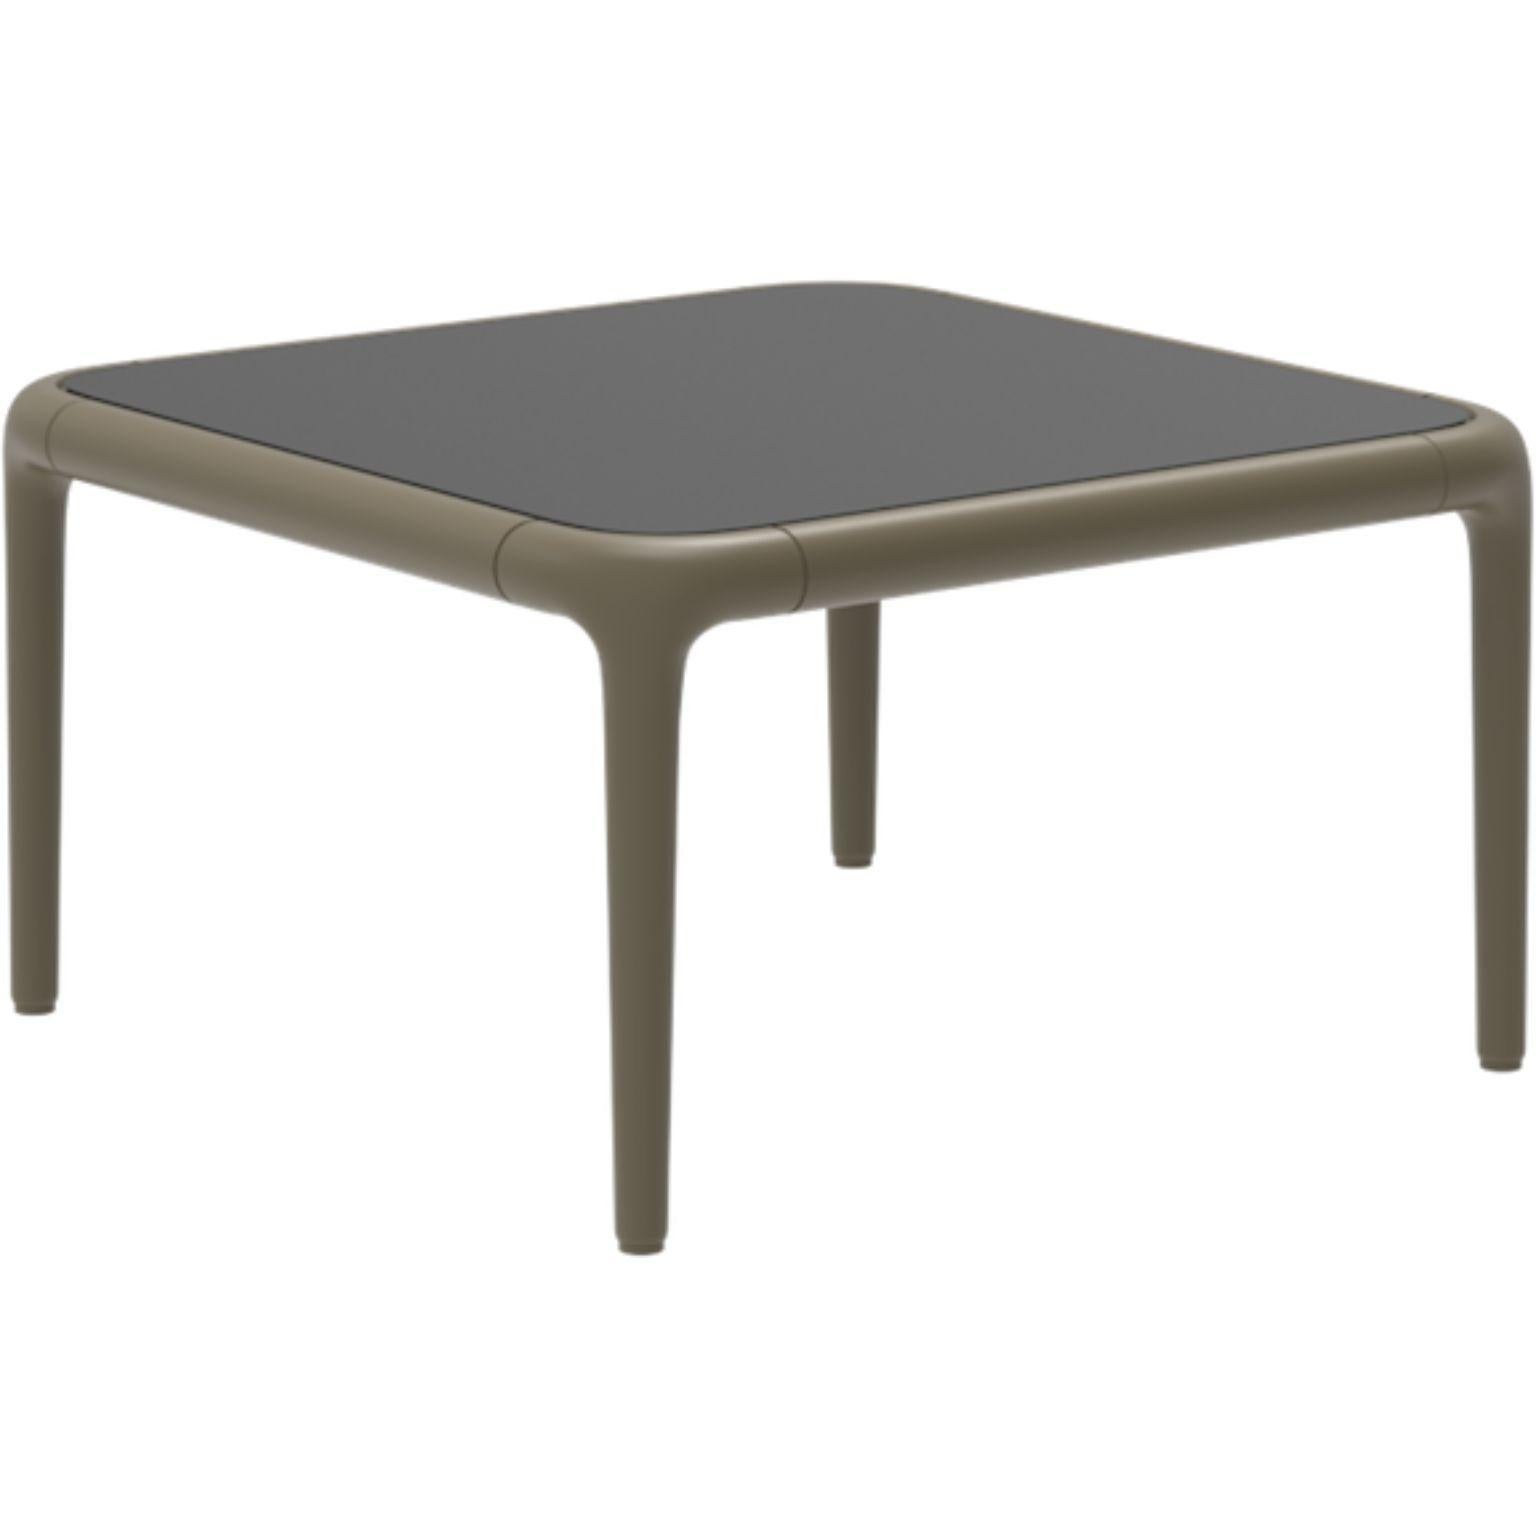 Xaloc bronze coffee table 50 with glass Top by Mowee
Dimensions: D 50 x W 50 x H 28 cm
Materials: Aluminum, tinted tempered glass top.
Also available in different aluminum colors and finishes (HPL Black Edge or Neolith).

Xaloc synthesizes the